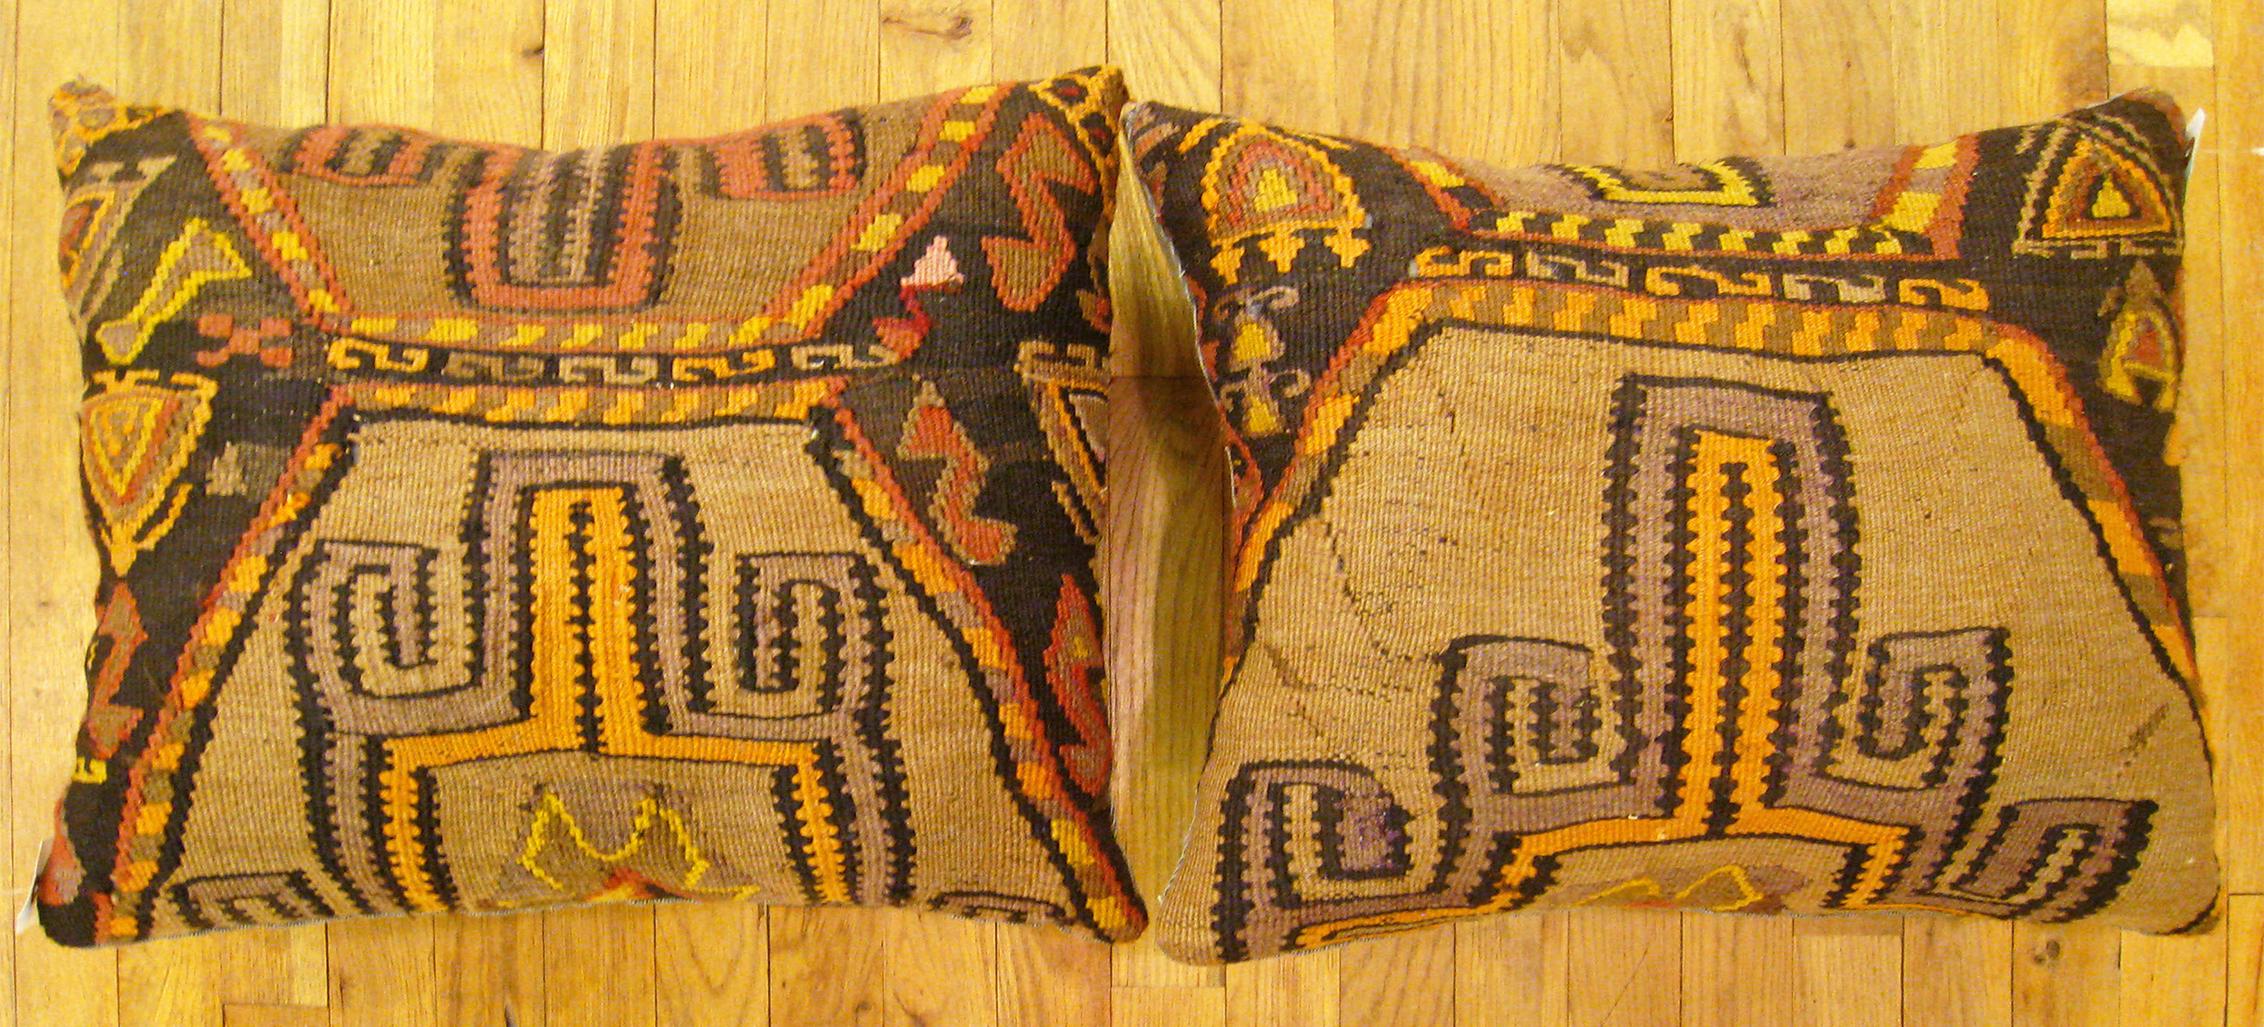 A Pair of Vintage Turkish Kilim rug pillows; size 22” x 18” Each.

A vintage decorative pillows with geometric abstracts allover a brown central field, size 22” x 18” each. This lovely decorative pillow features a vintage fabric of a KIilim carpet